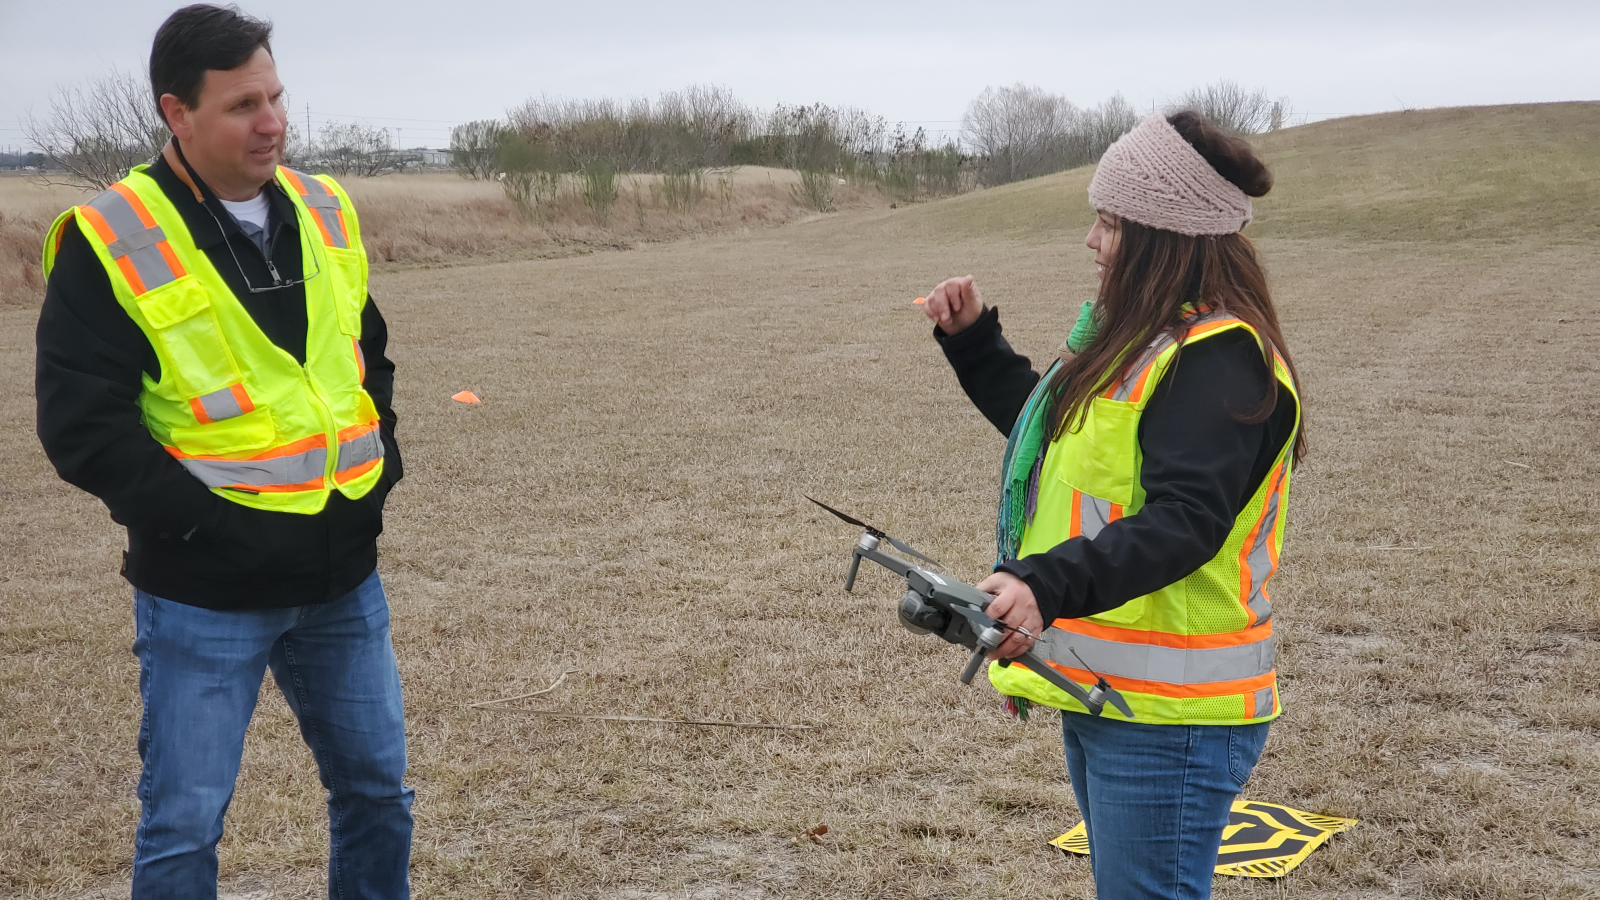 Two GIS students talking holding a drone.